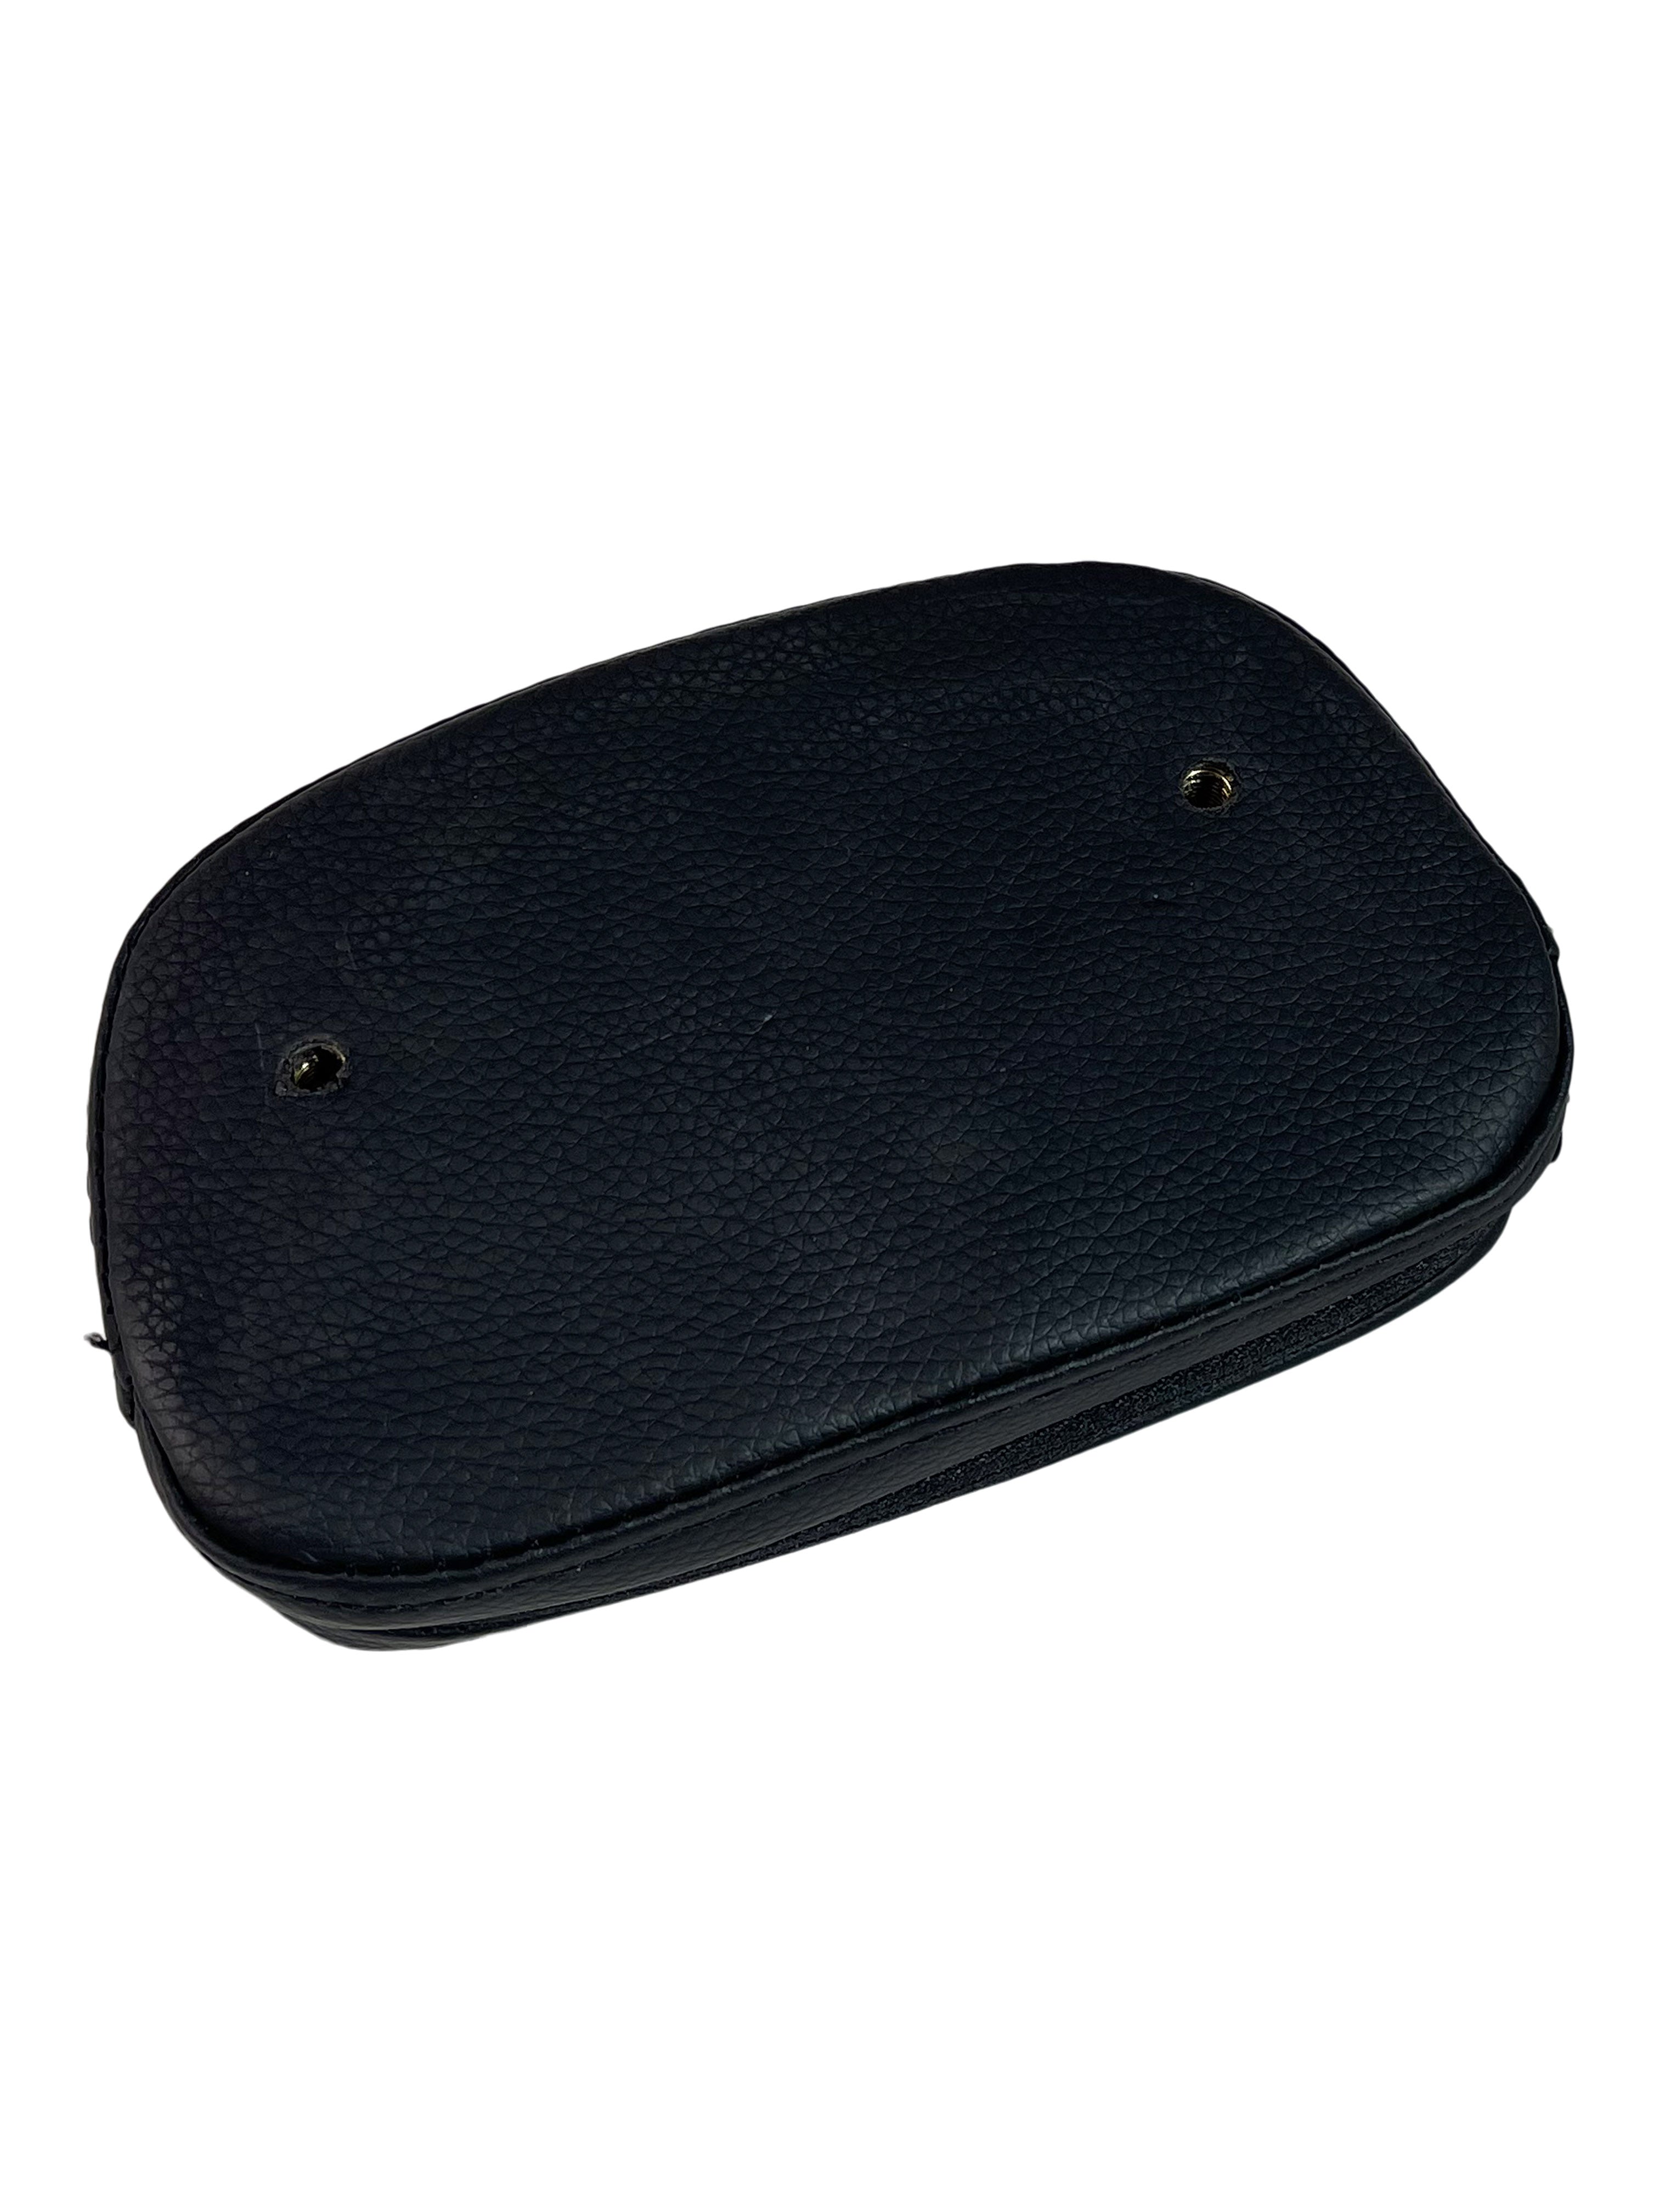 Back rest pad, fits MWL-220 and MWL-120 - Part# PAD-220